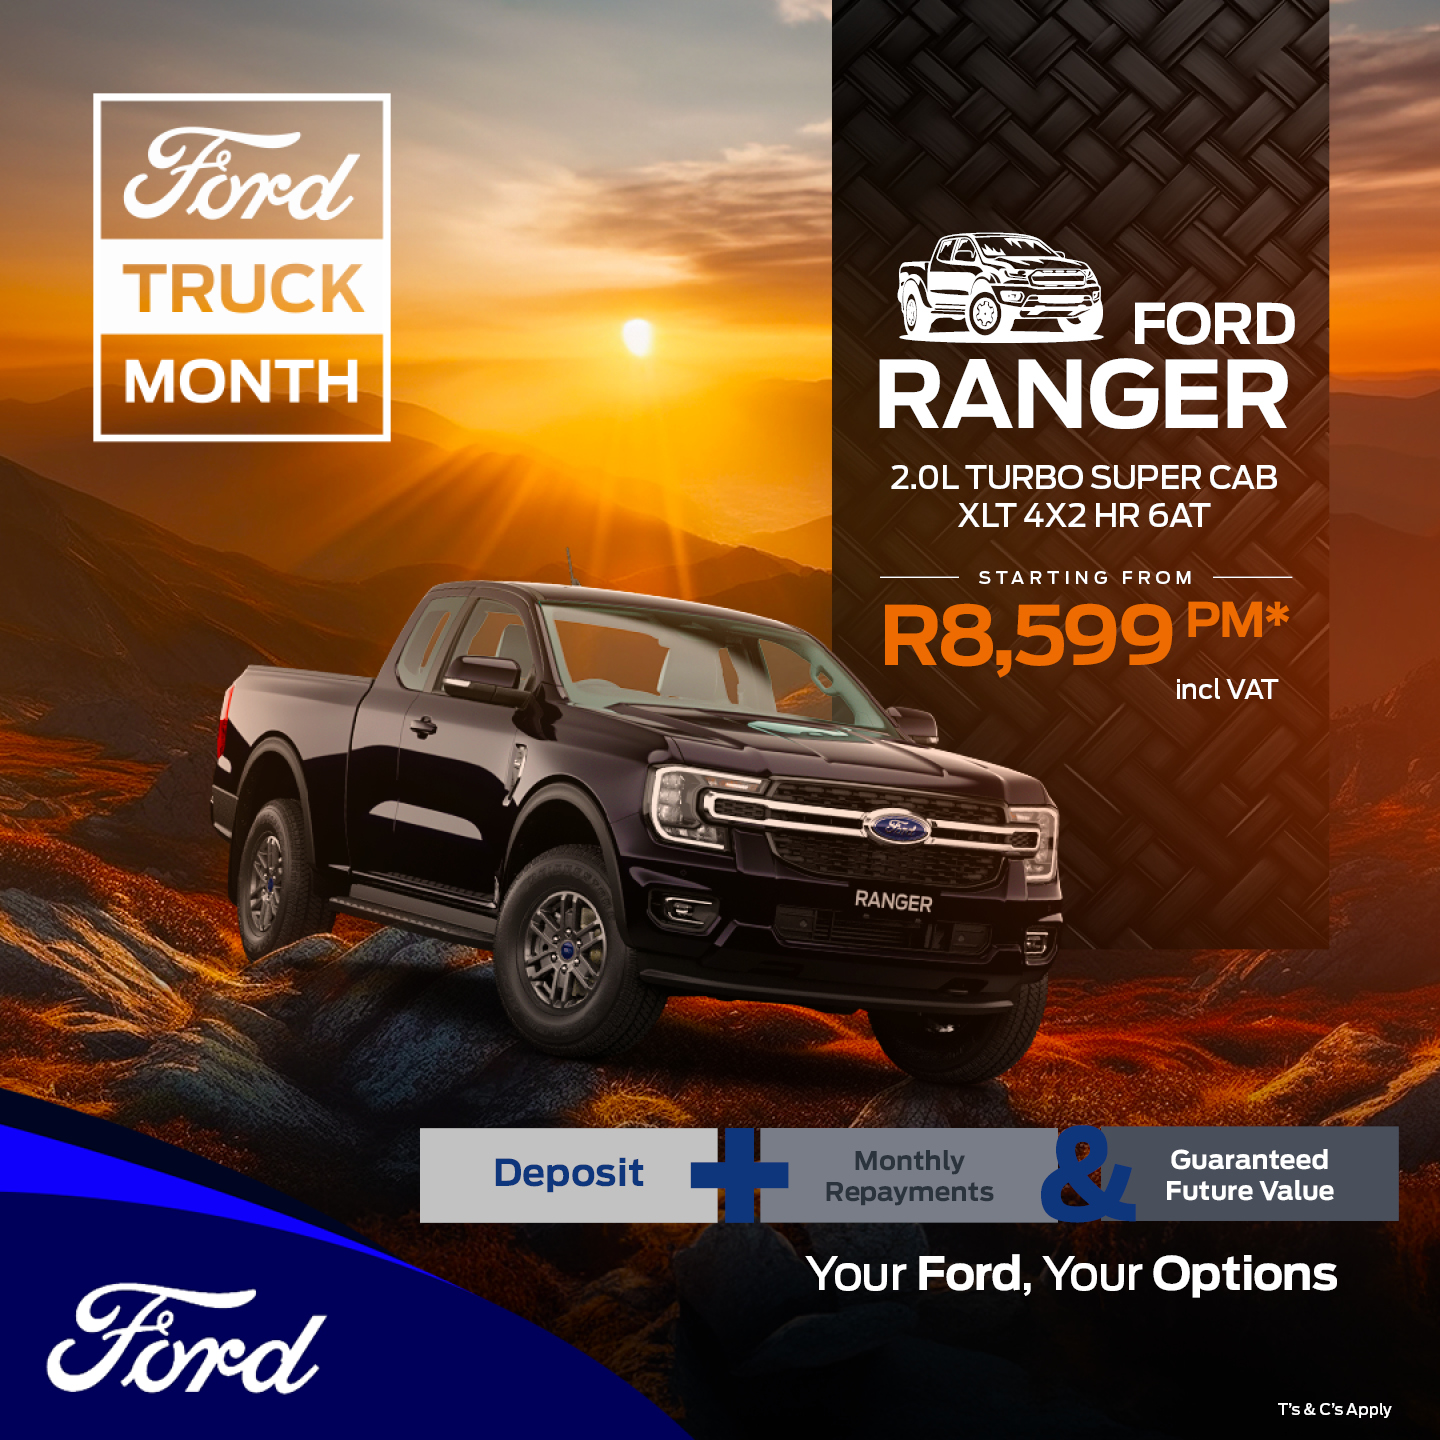 Ford Truck Month – 2.0L Turbo S/Cab XLT 4×2 6AT image from 